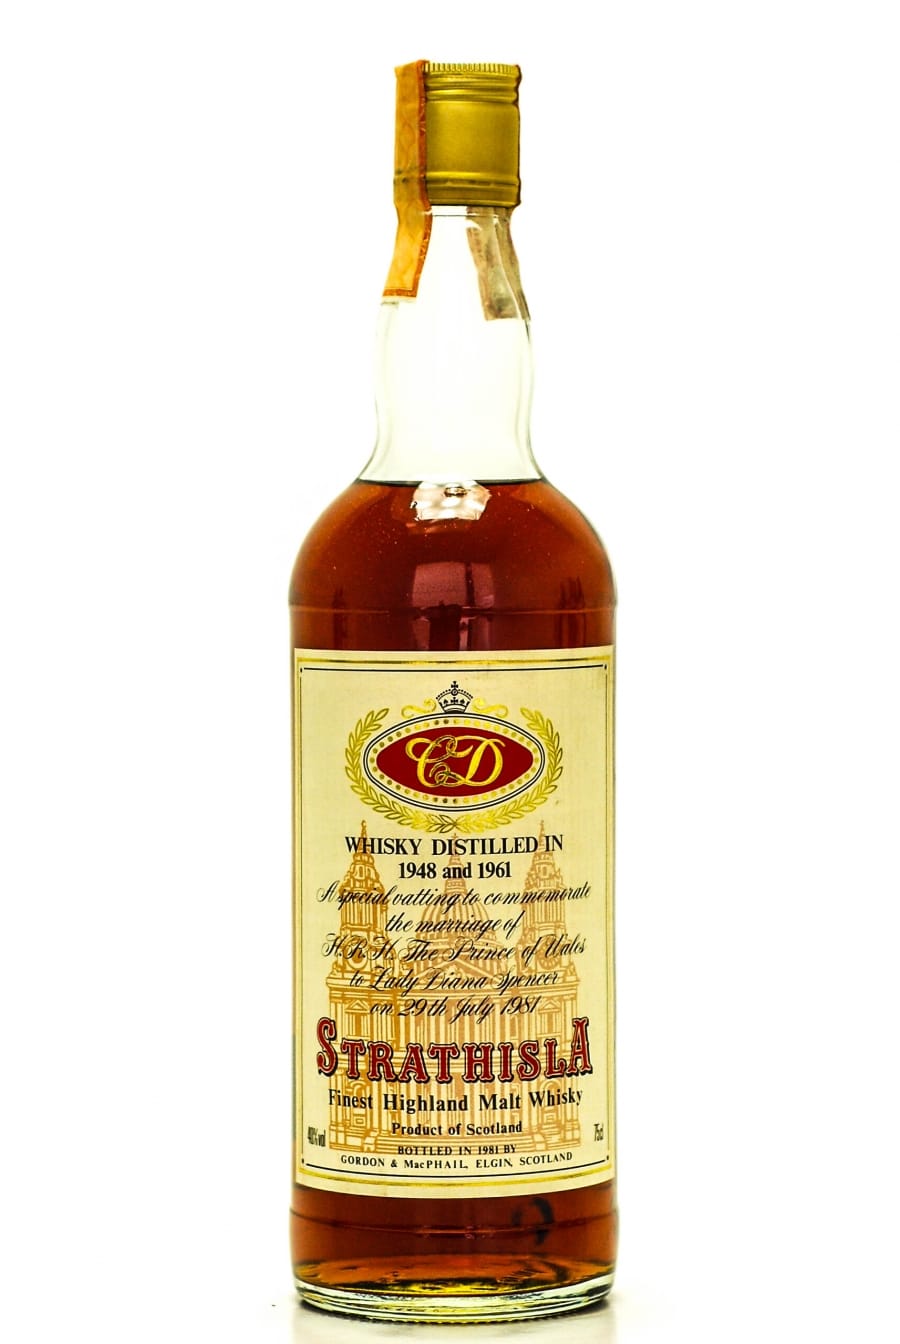 Strathisla - Strathisla Gordon & McPhail Distilled 1948 and 1961 bottled 1981 A special vatting to commemorate the marriage of H.R.H. The Prince of Wales to Lady Diana 40% 1948-1961 Perfect